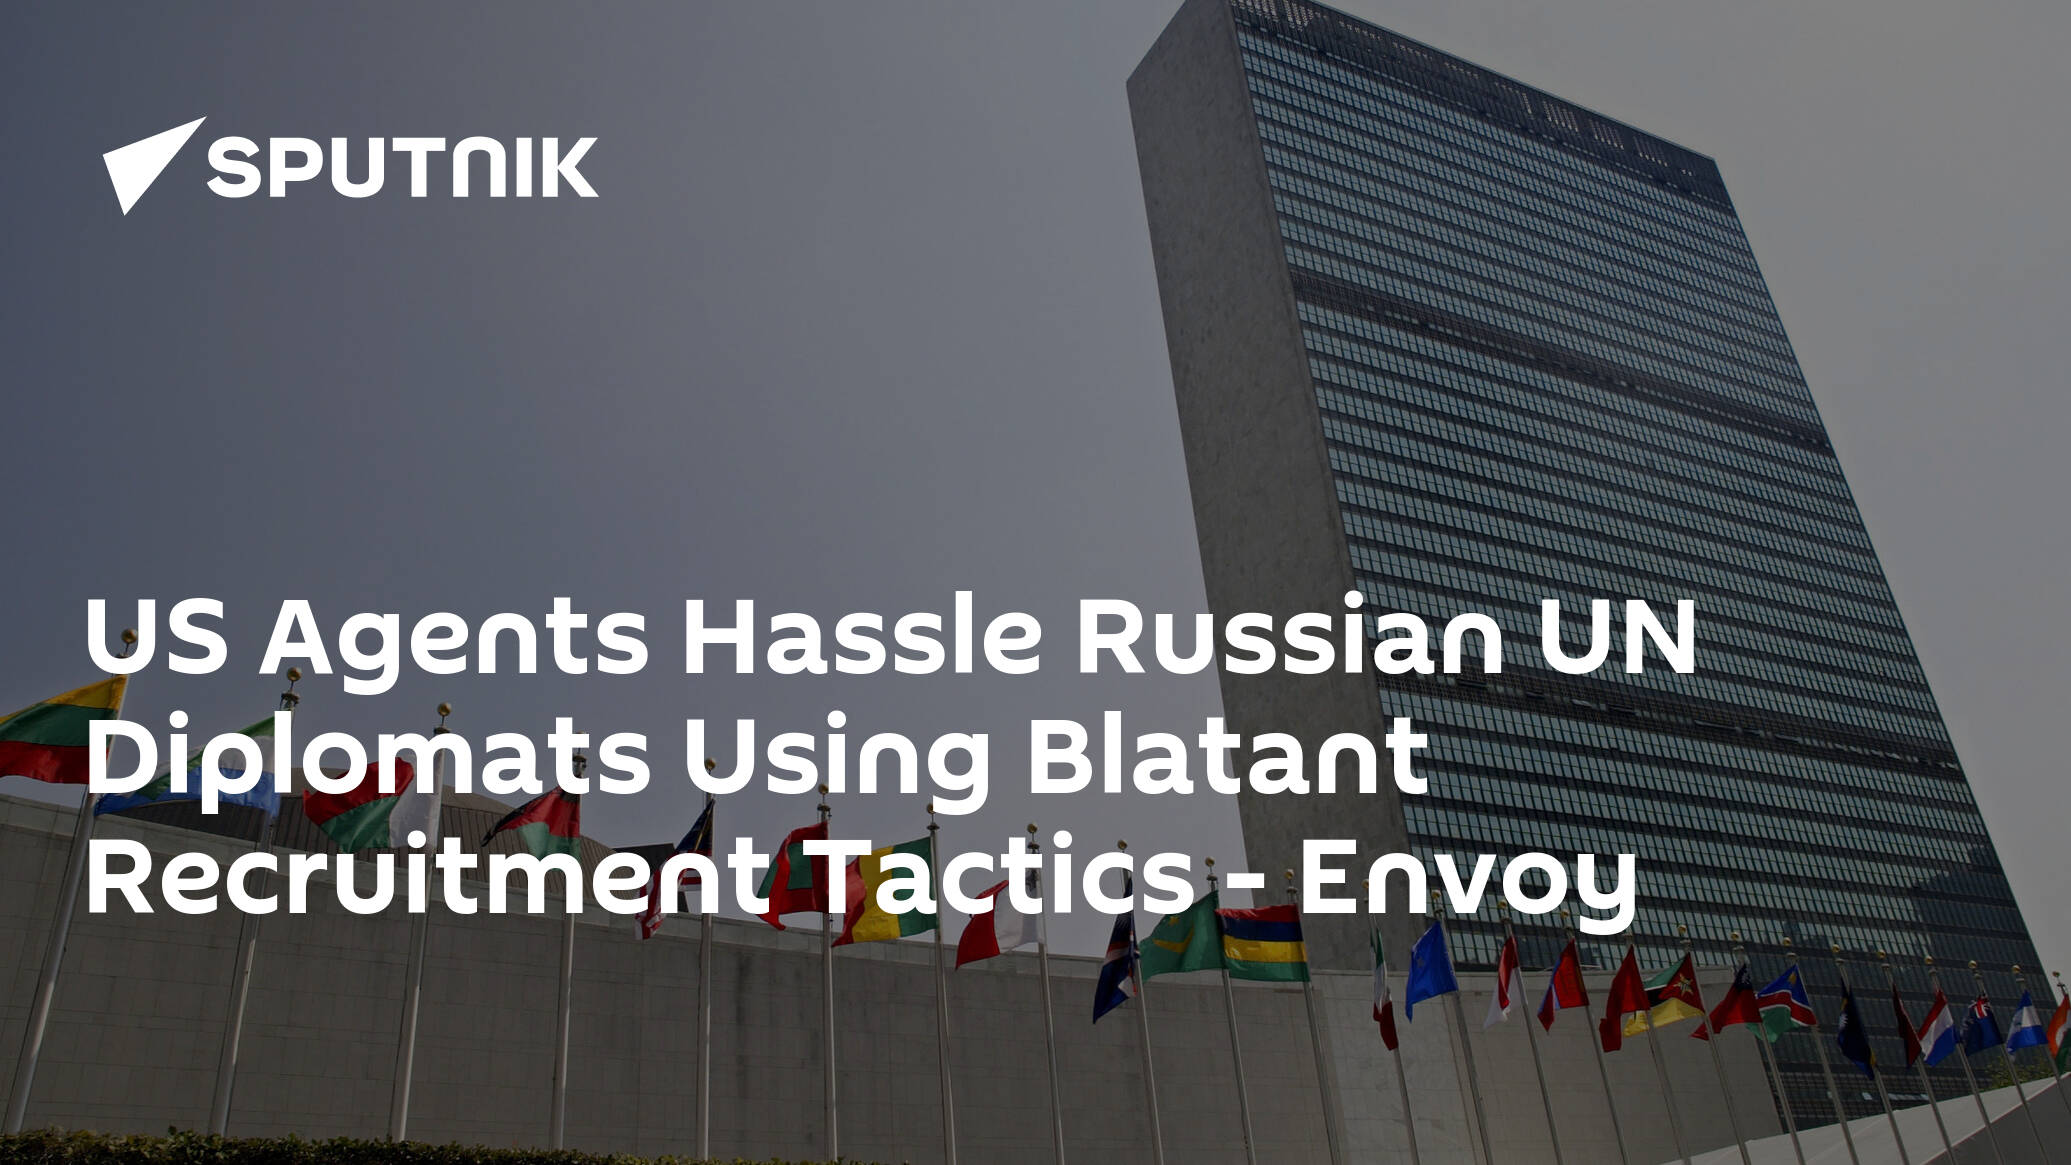 US Security Services Trying to Recruit Russian Diplomats in UN – Deputy Representative